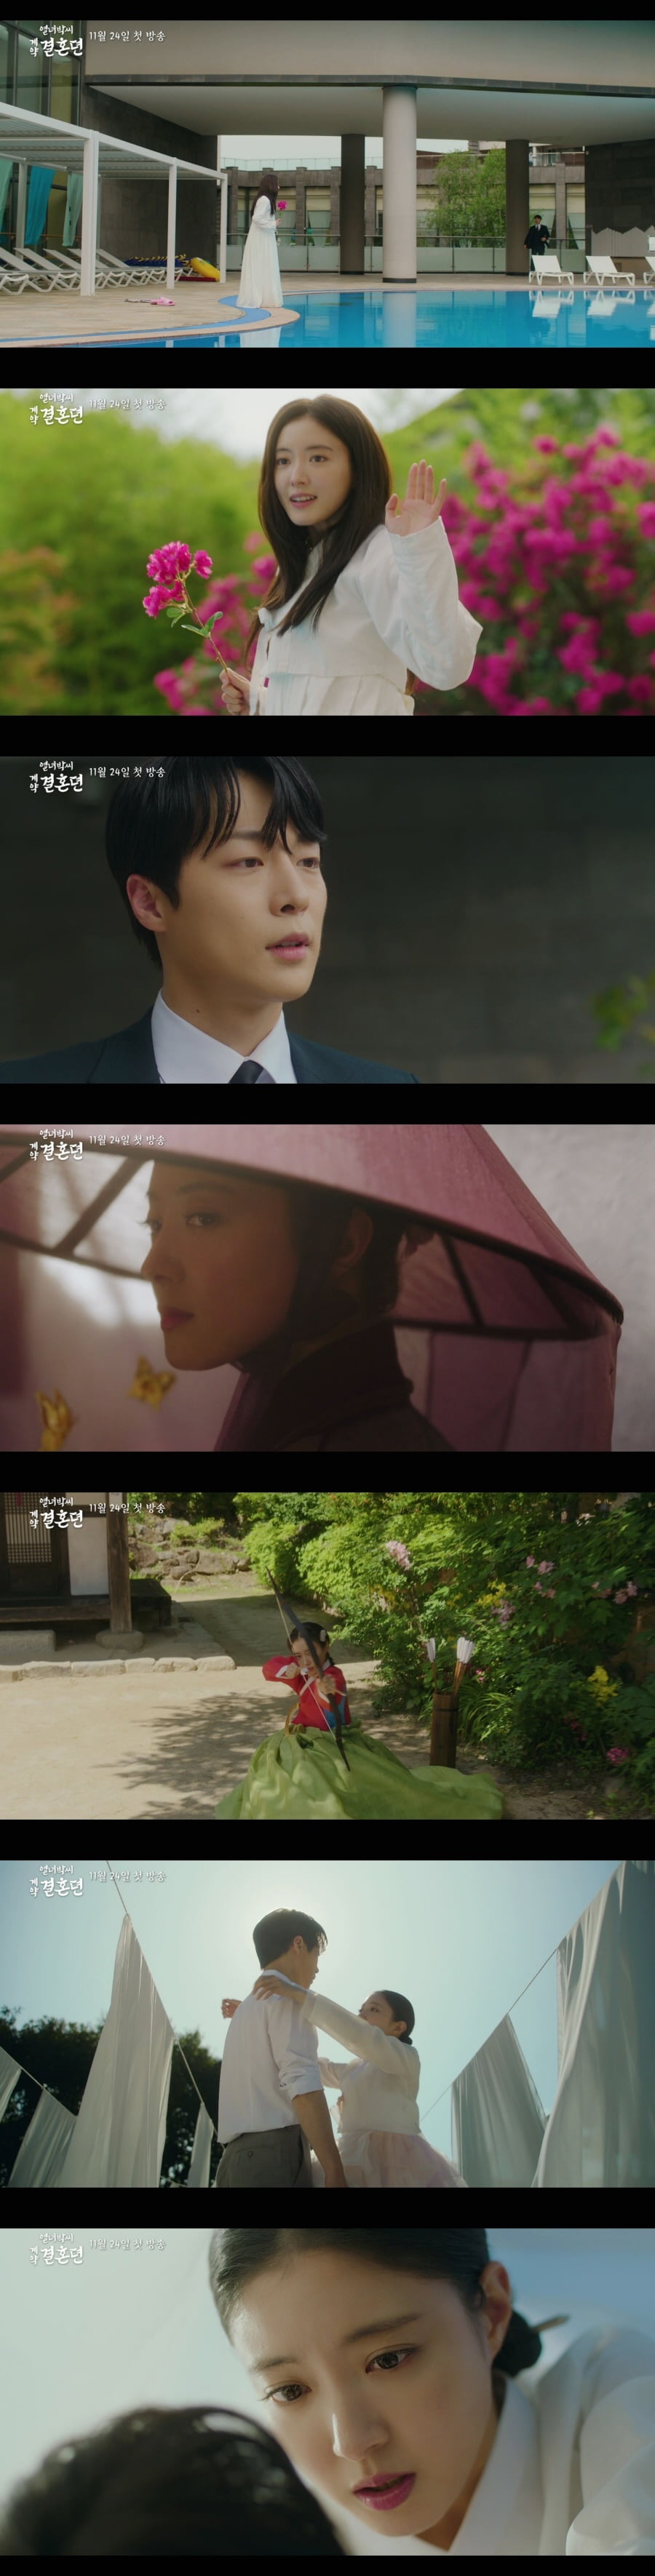 A delicate romance with Lee Se-young and Bae In-hyuk